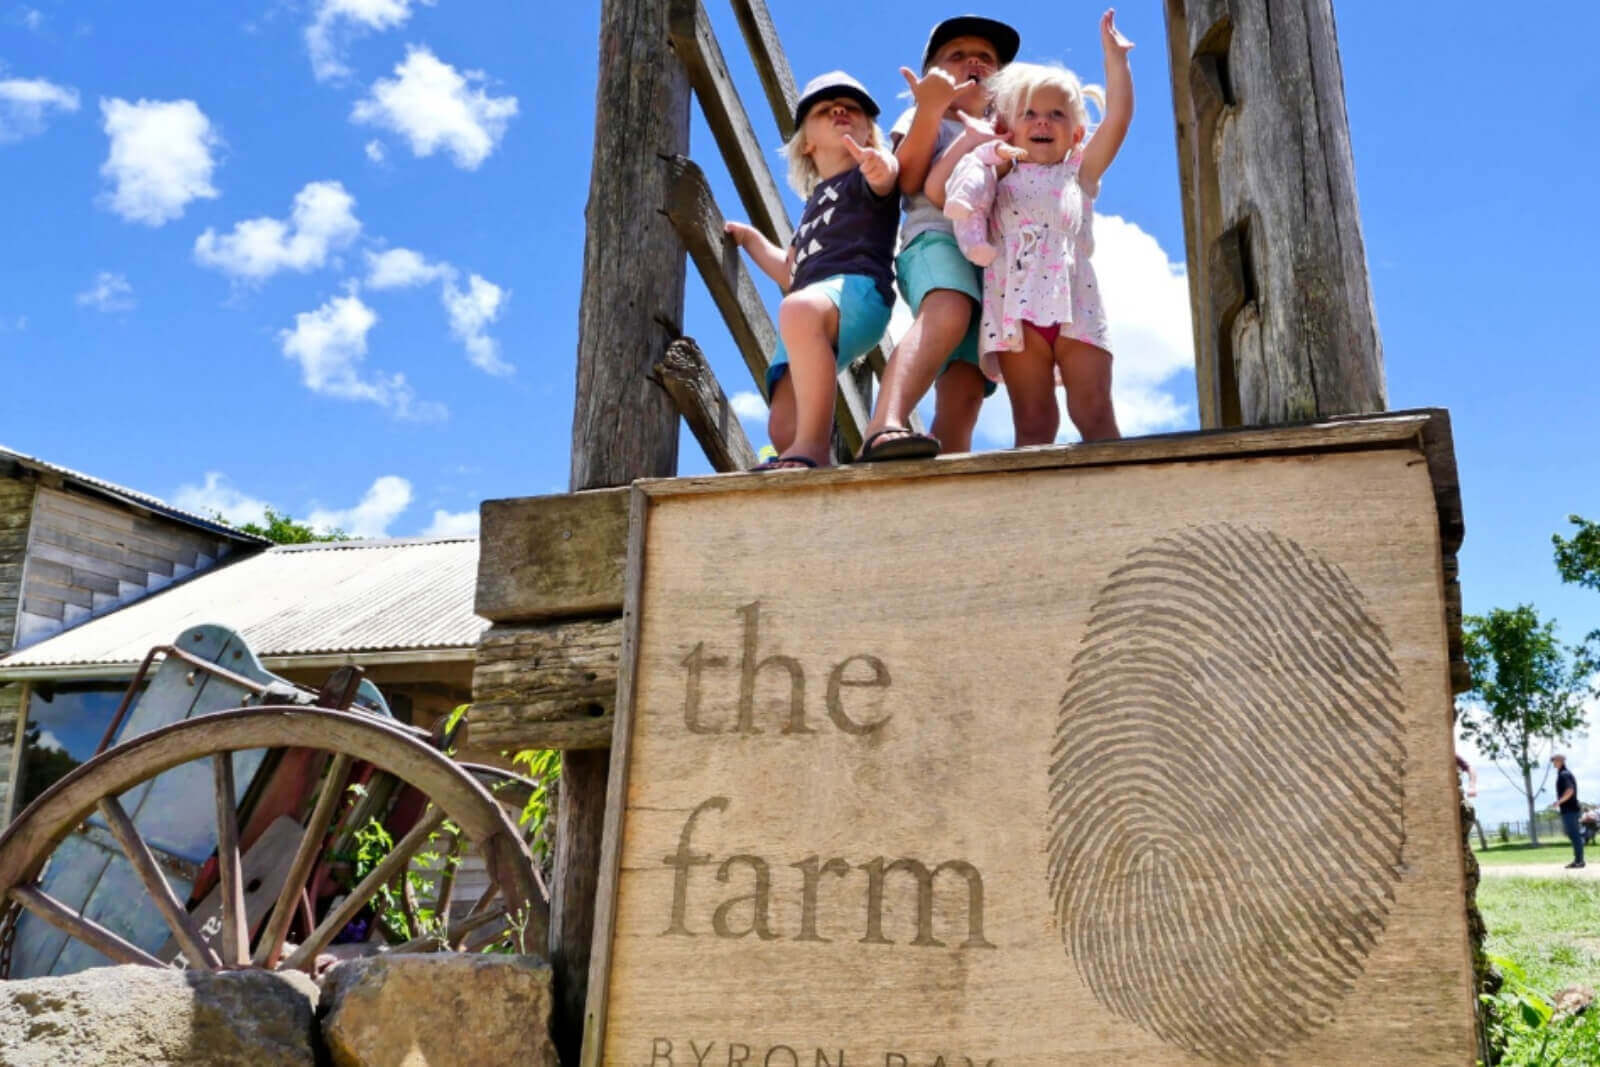 Out and About // The Farm, Byron Bay